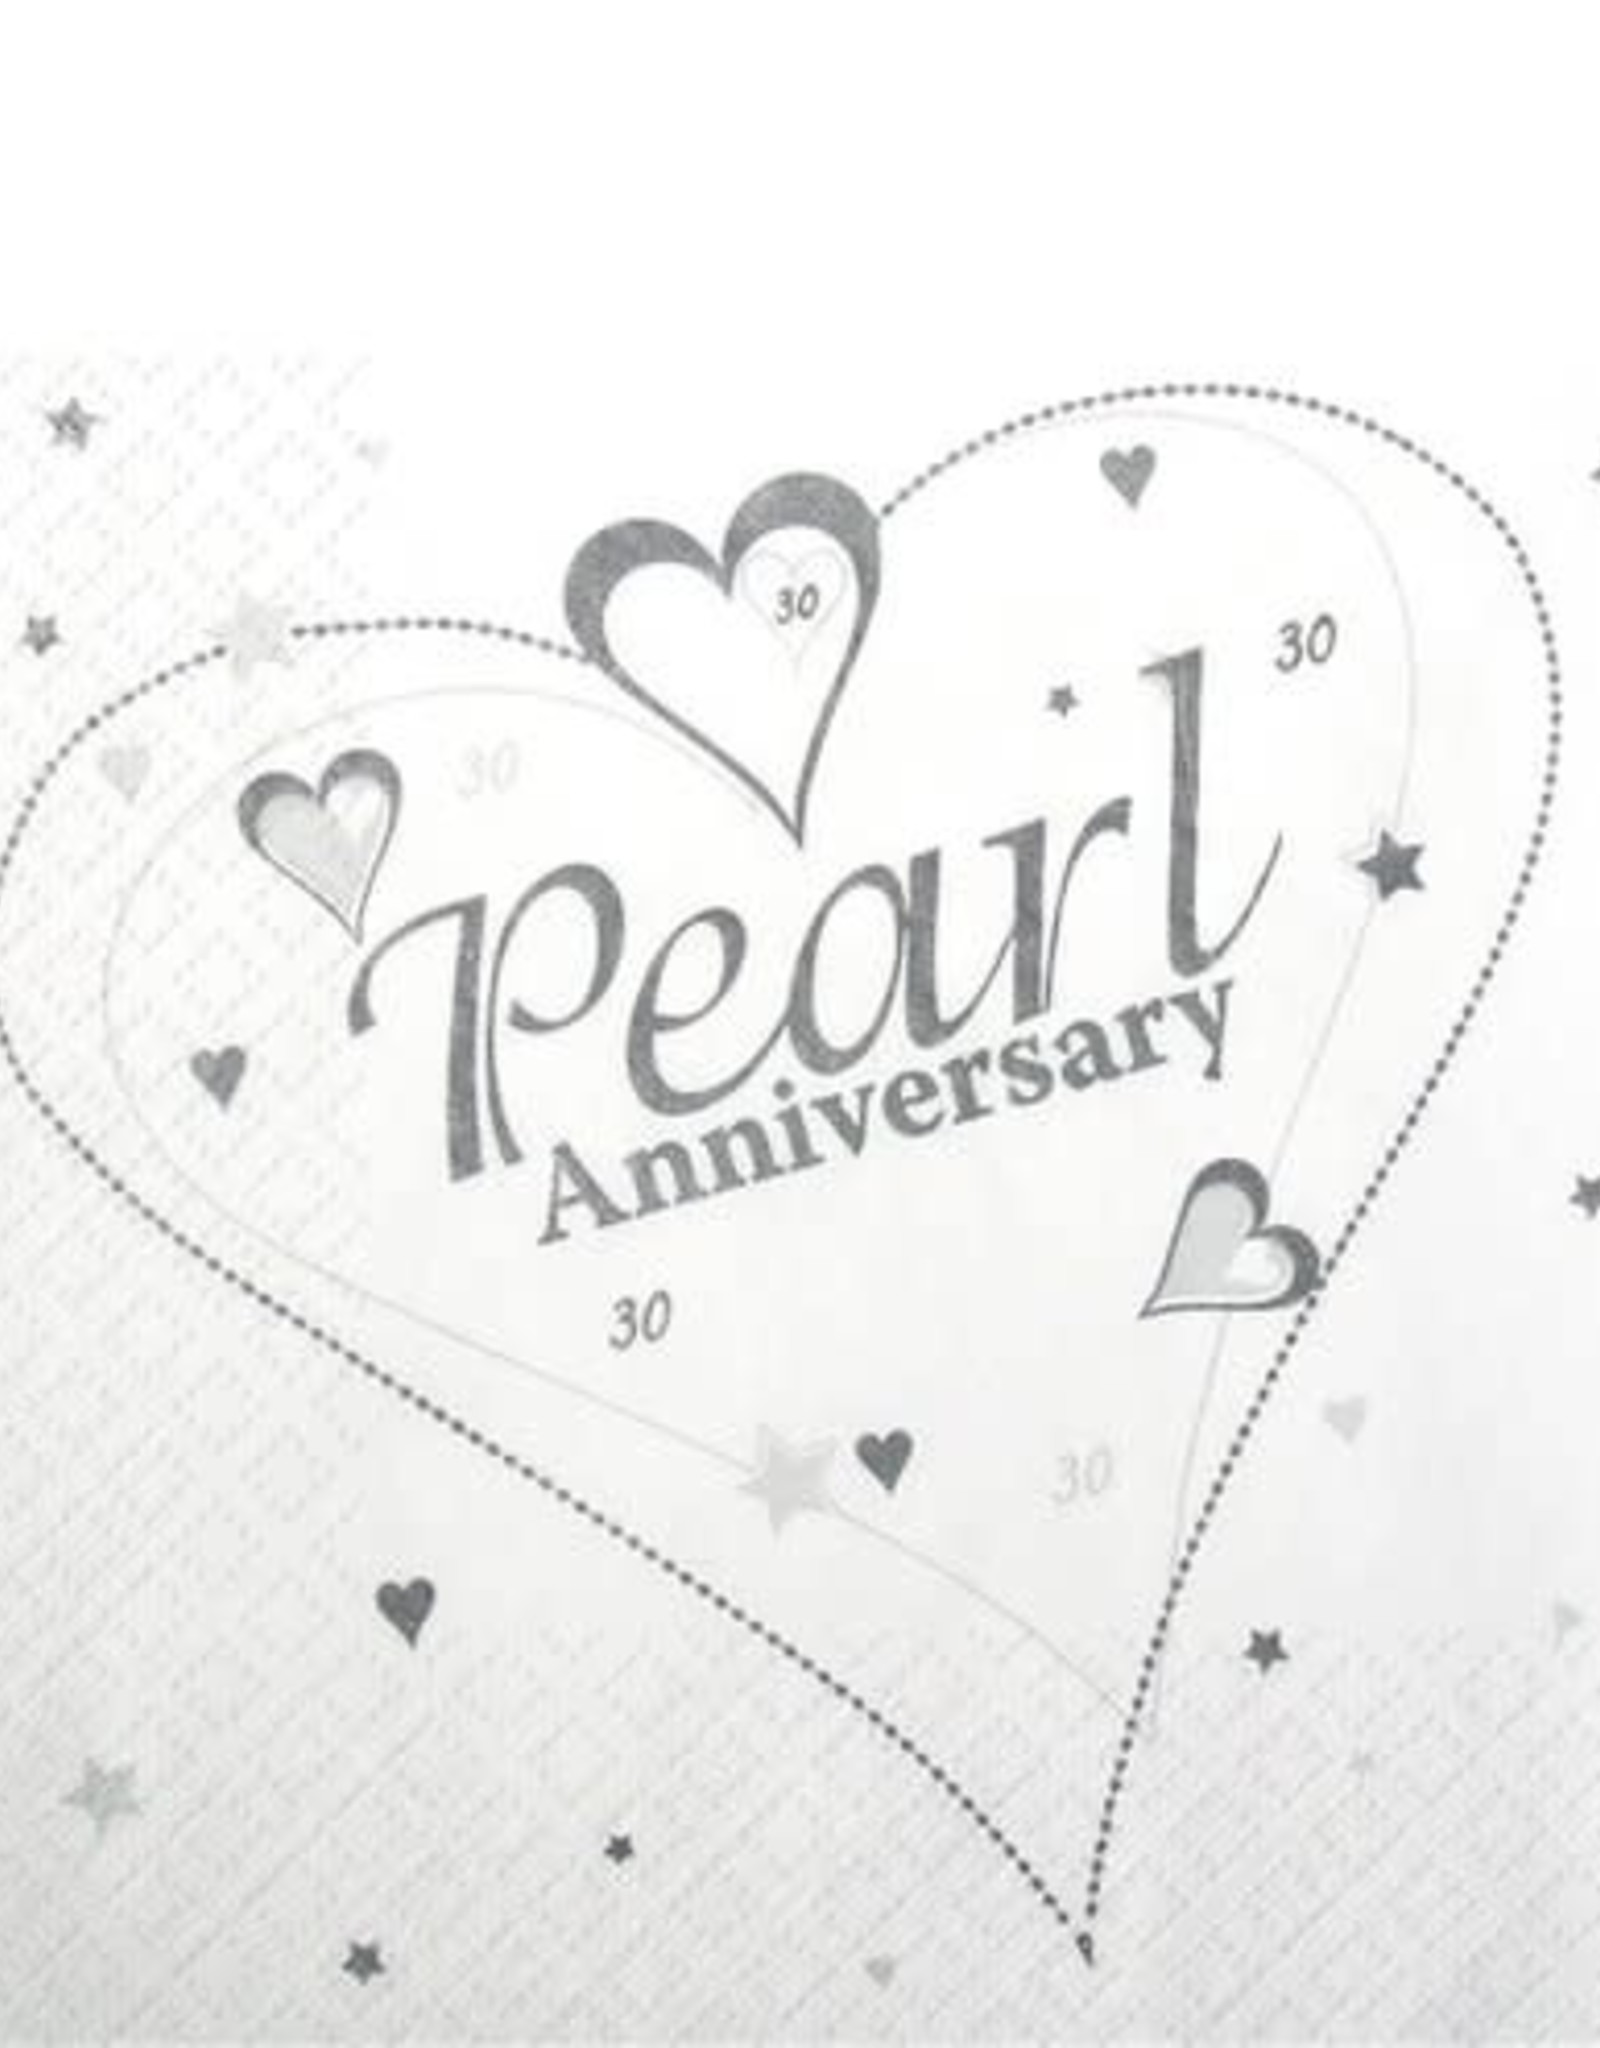 Pearl Anniversary Napkins - 3ply Paper